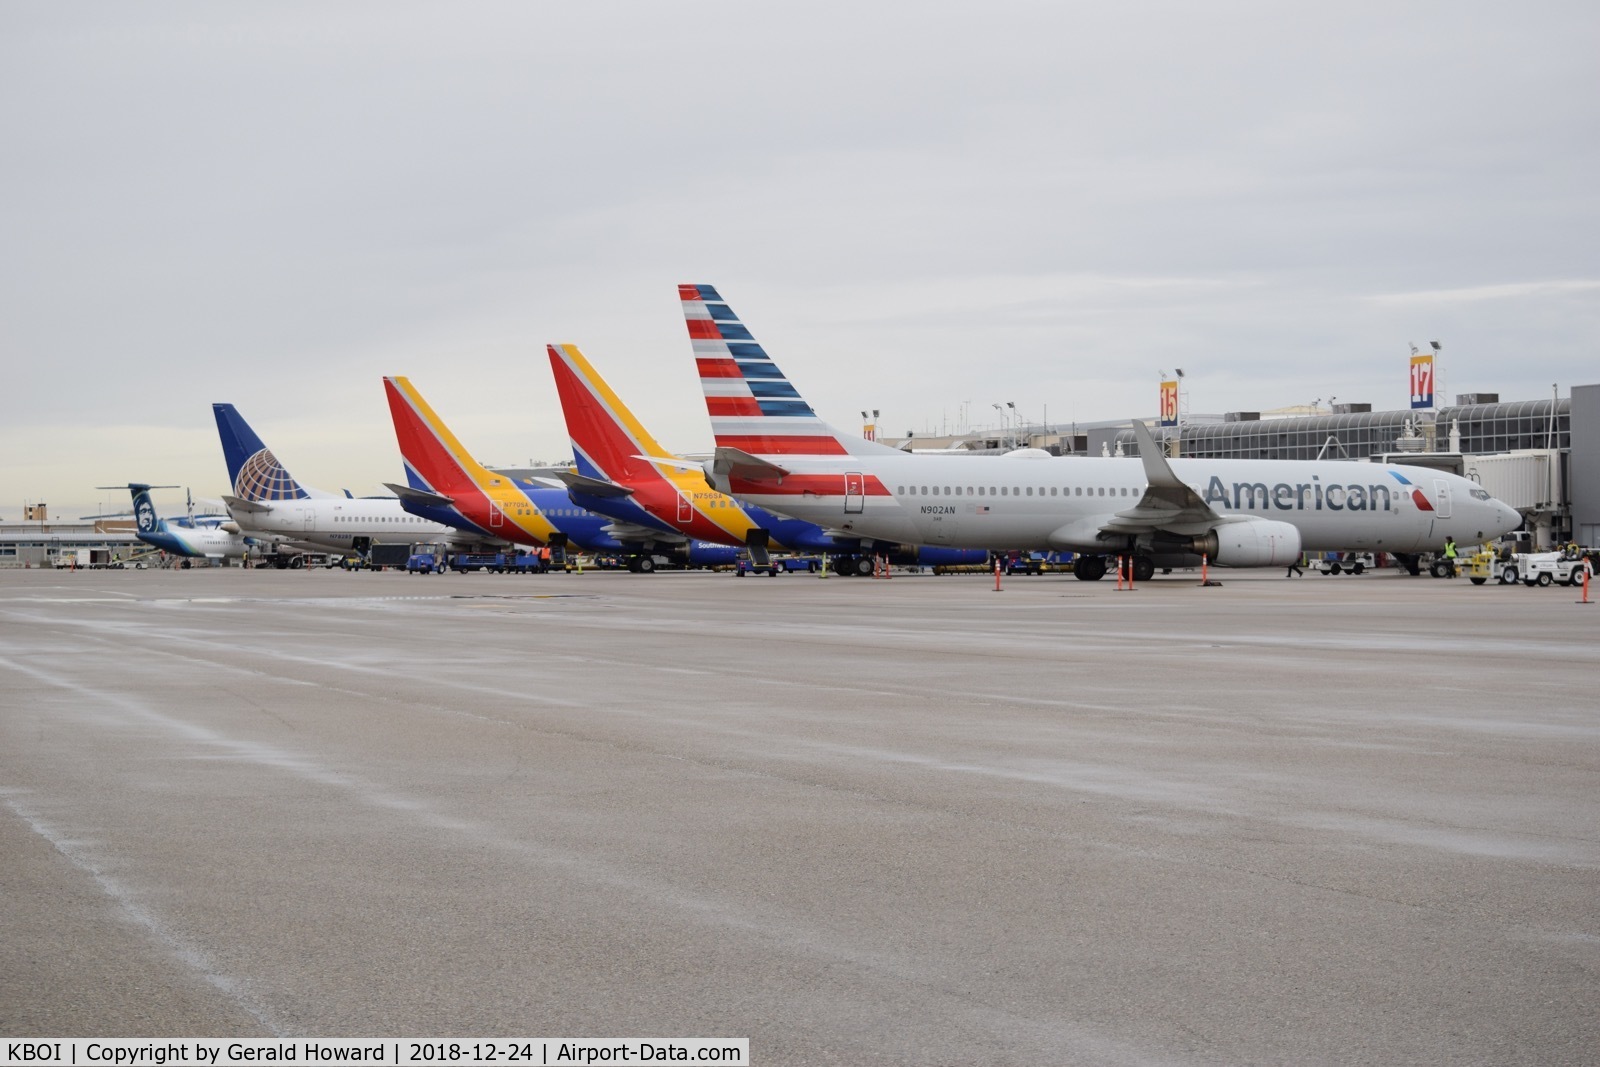 Boise Air Terminal/gowen Fld Airport (BOI) - Mid day flights in on south side of Concourse B.